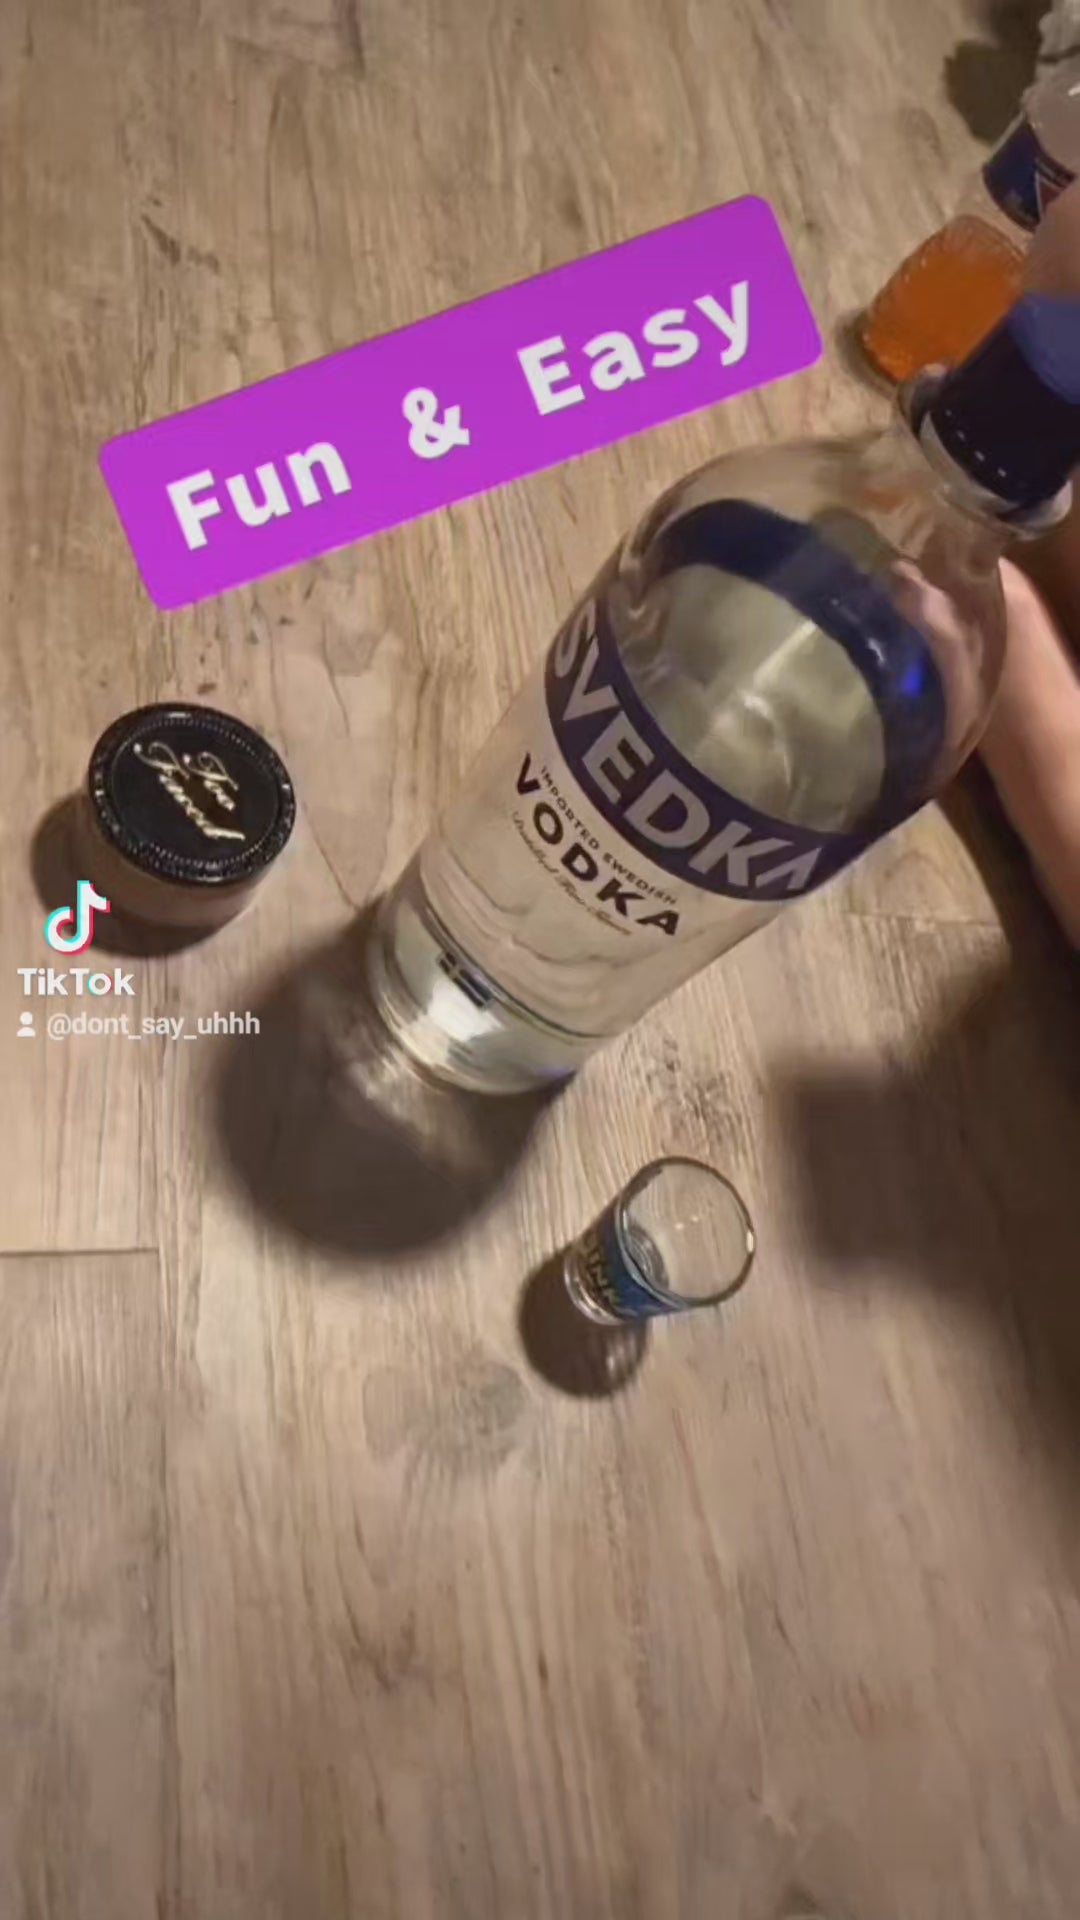 Load video: In a lively party setting, friends gather around a table, pouring shots of vodka into shot glasses with excitement. The camera then zooms in on a game box labeled &#39;Don&#39;t Say Uhhh,&#39; indicating the start of a drinking game.